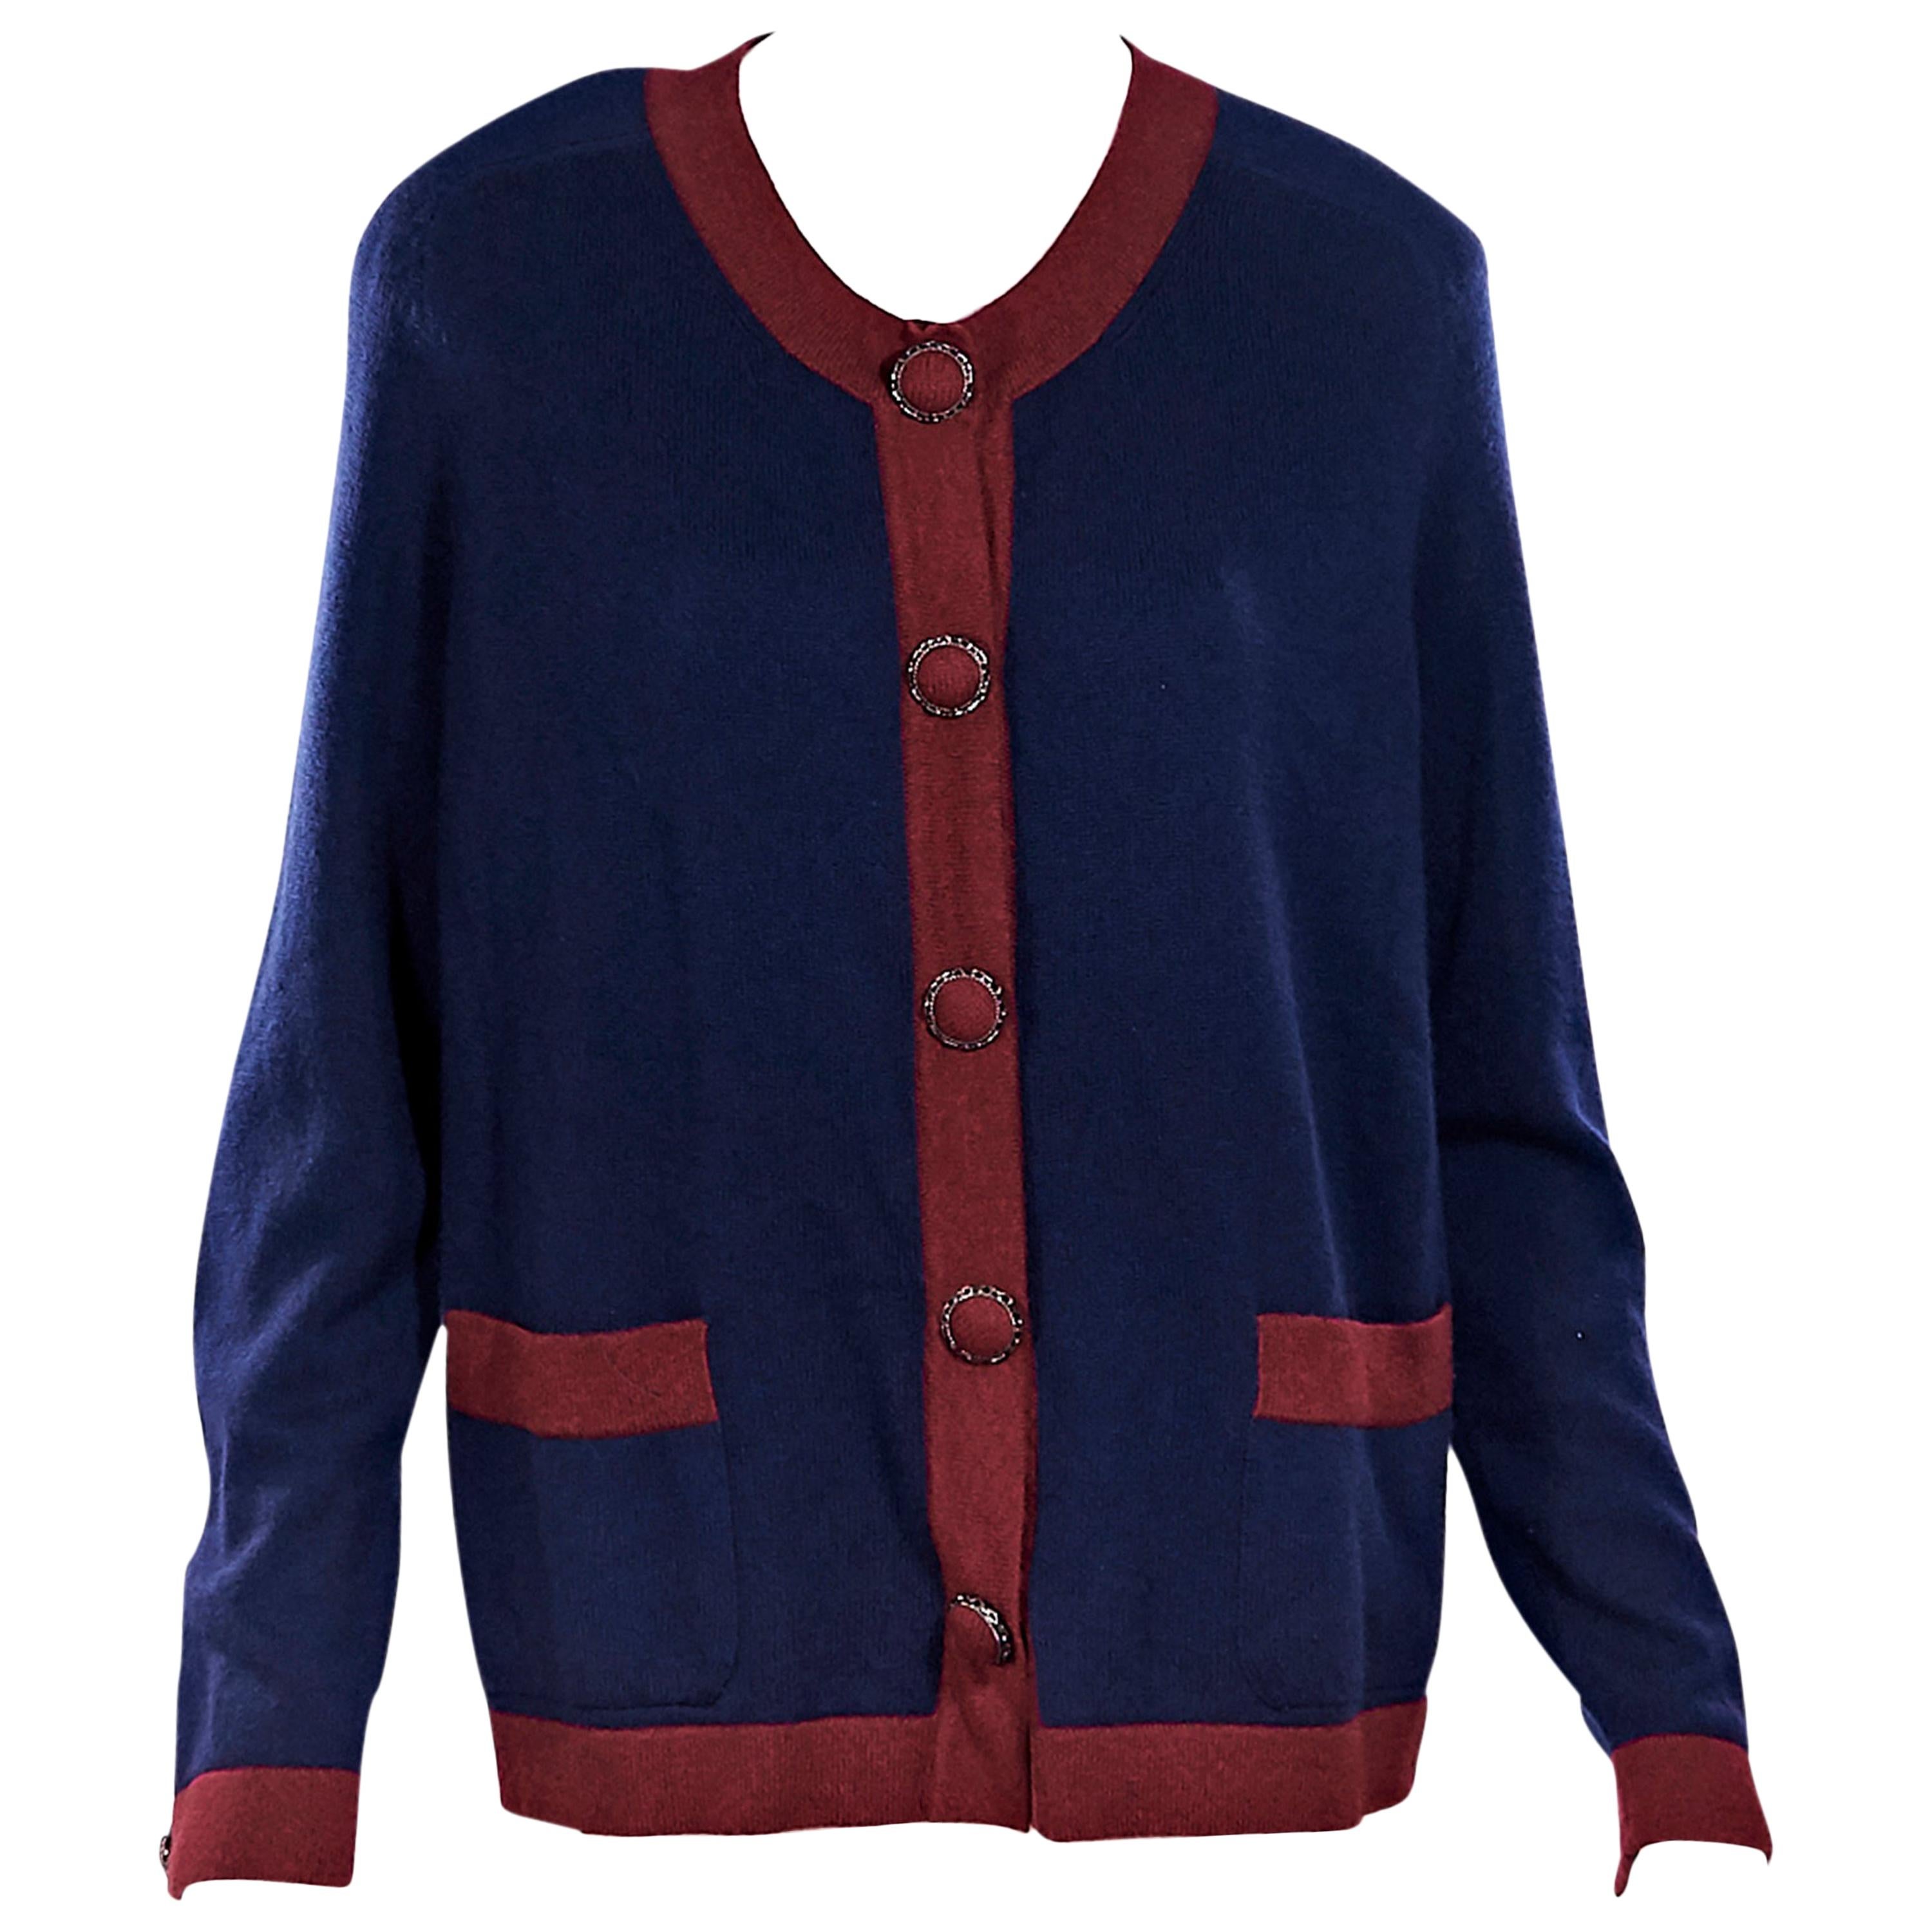 Navy Blue & Red Chanel Cashmere Cardigan